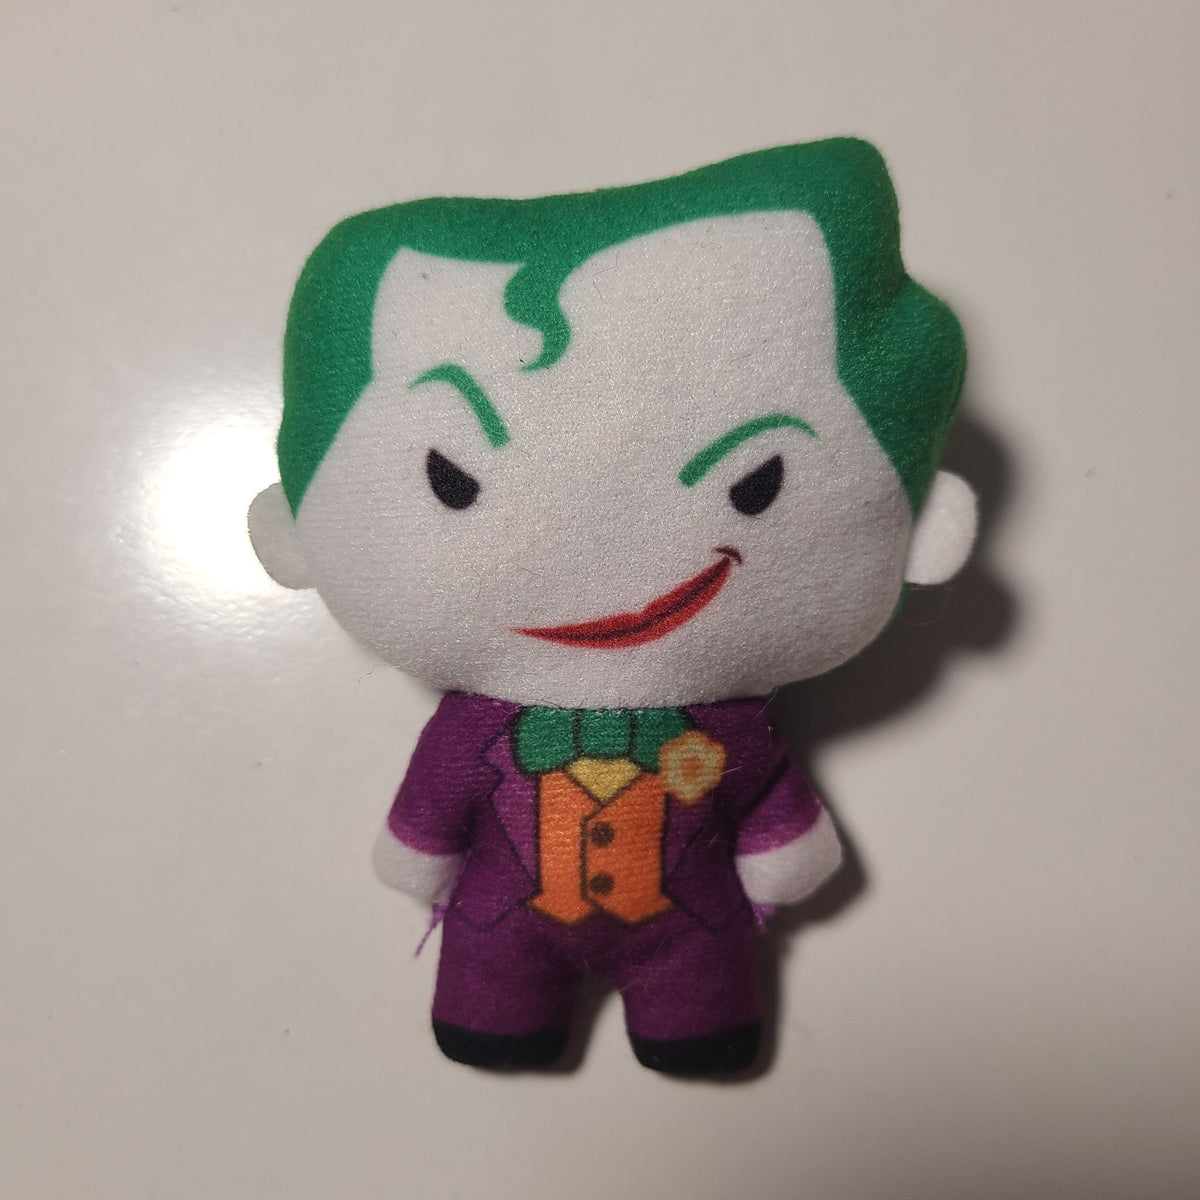 The Joker - Justice League DC Super Heroes by McDonalds Happy Meal Toys 2021 - 1